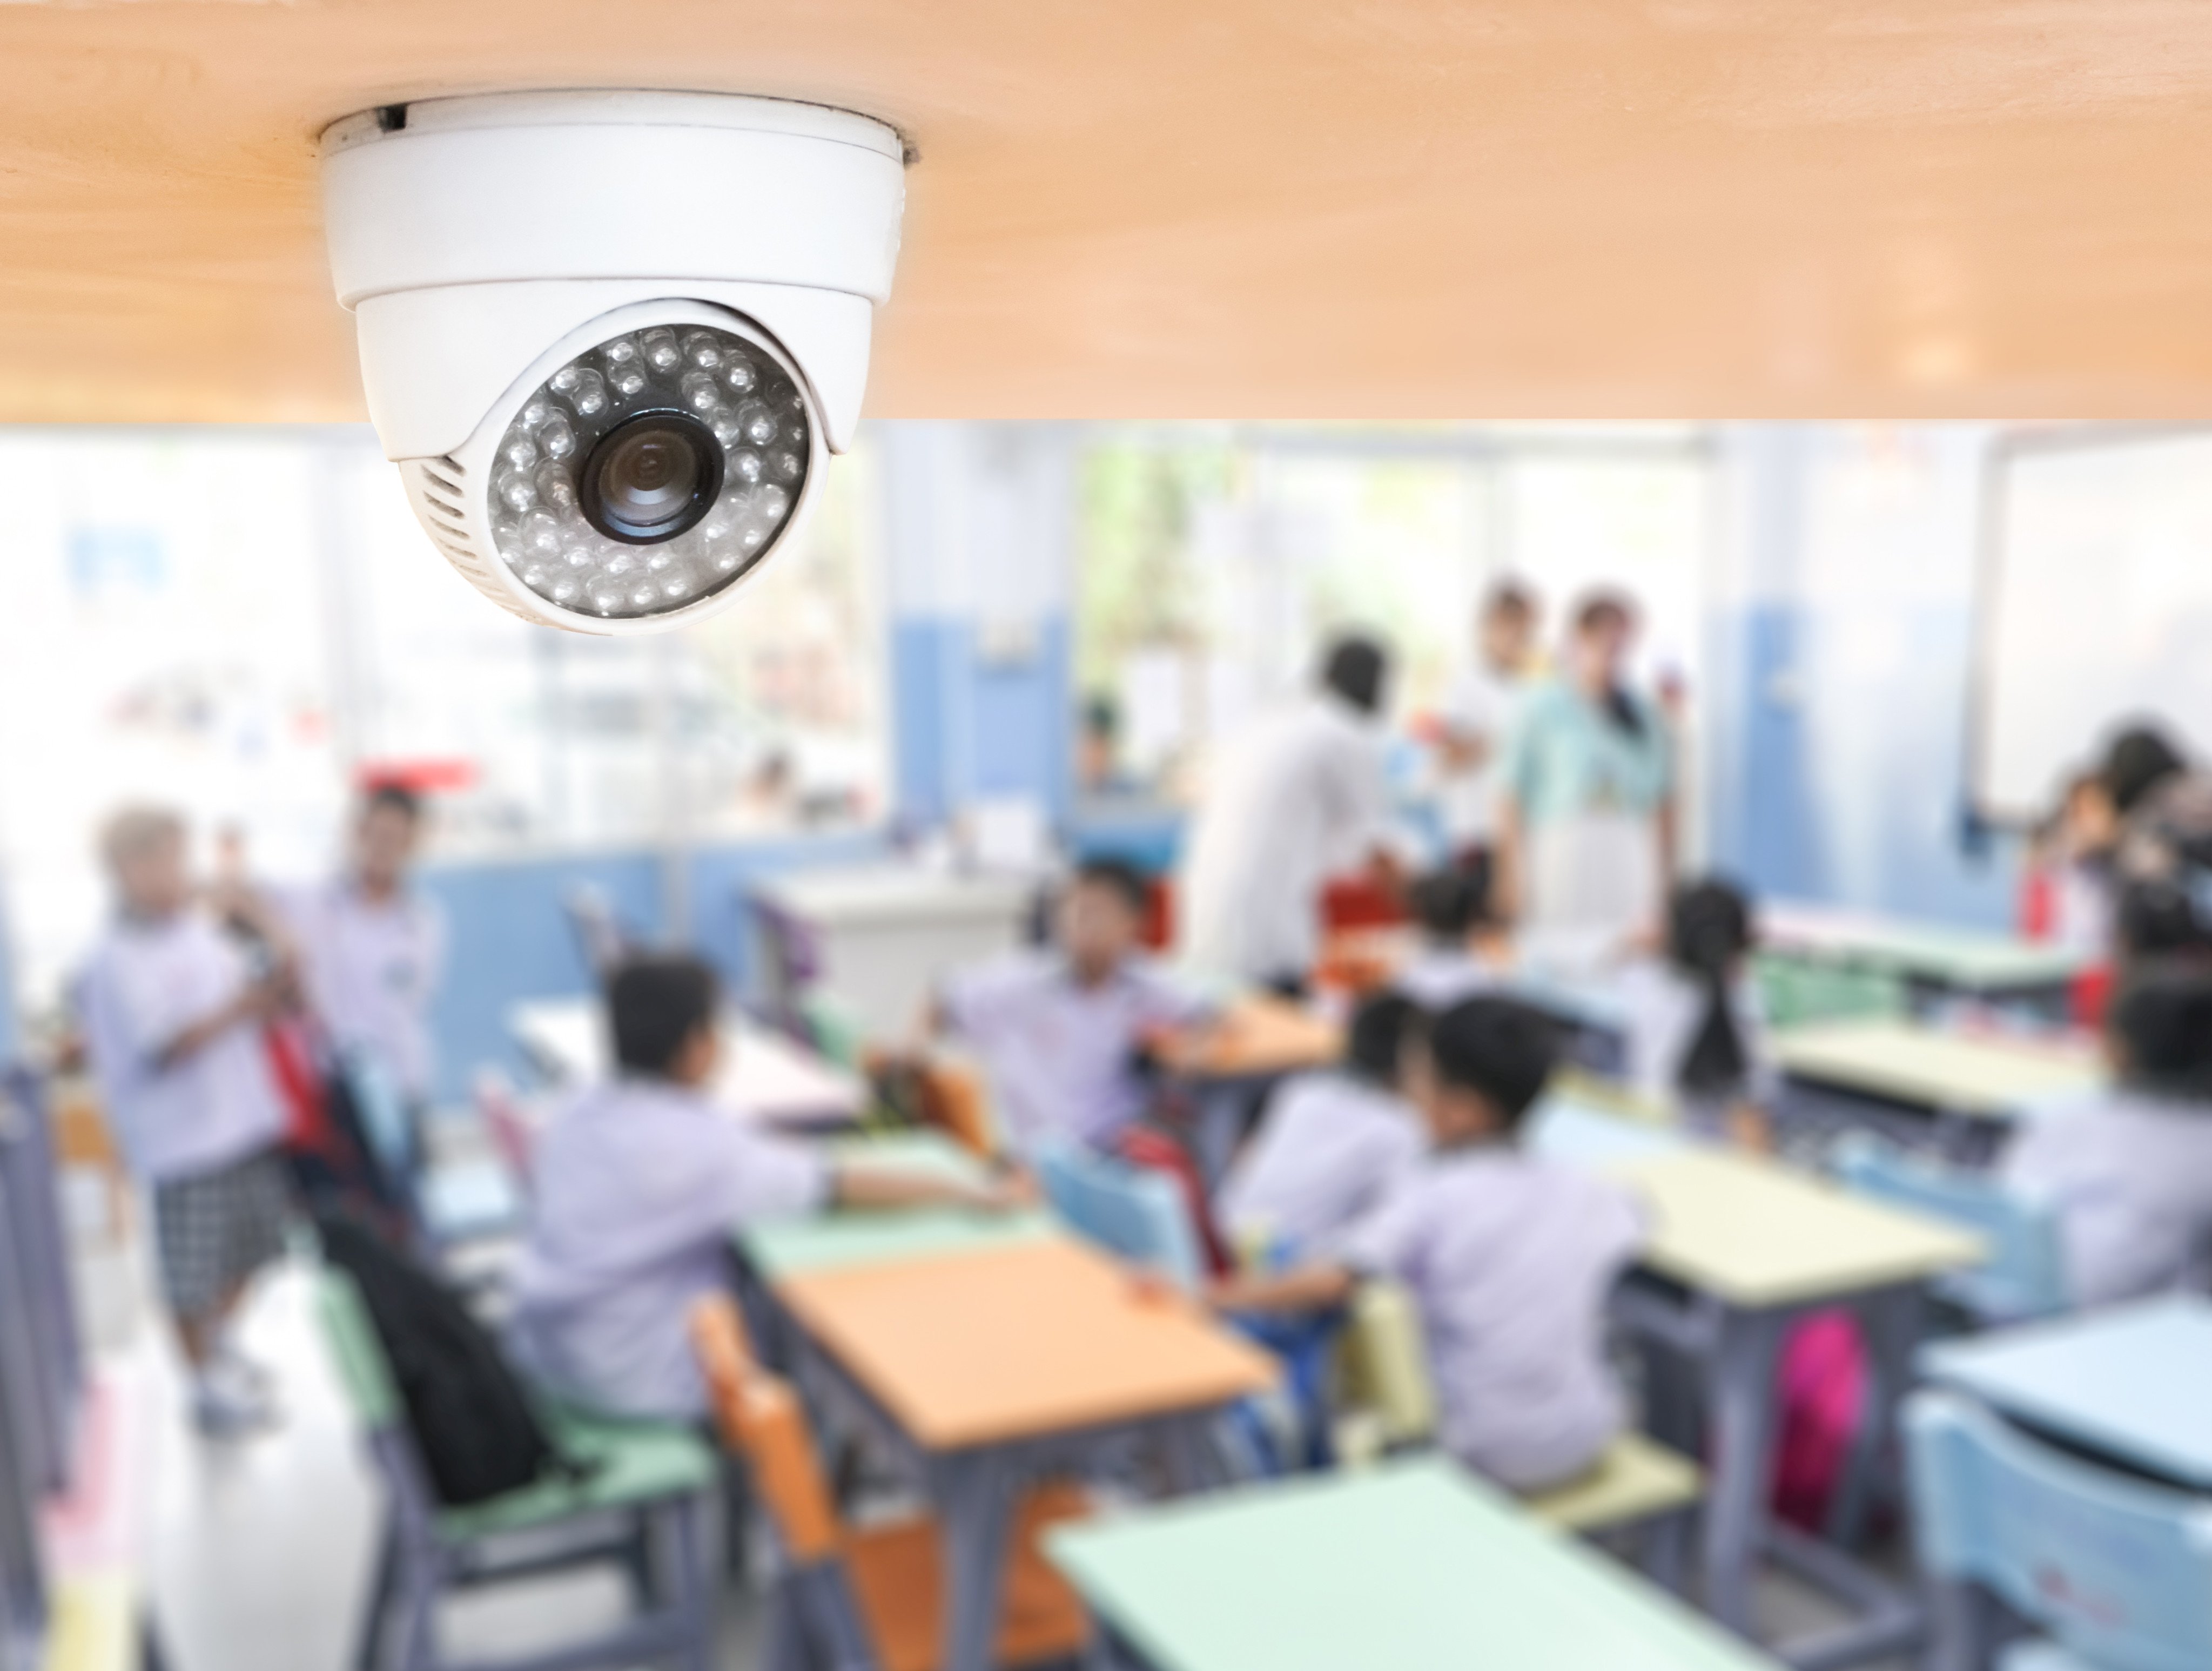 A closed-circuit television camera monitors students in a classroom. The study’s findings align with widely held views that North Korean leader Kim Jong-un is stepping up efforts to tighten the state’s control of its citizens. Photo: Shutterstock